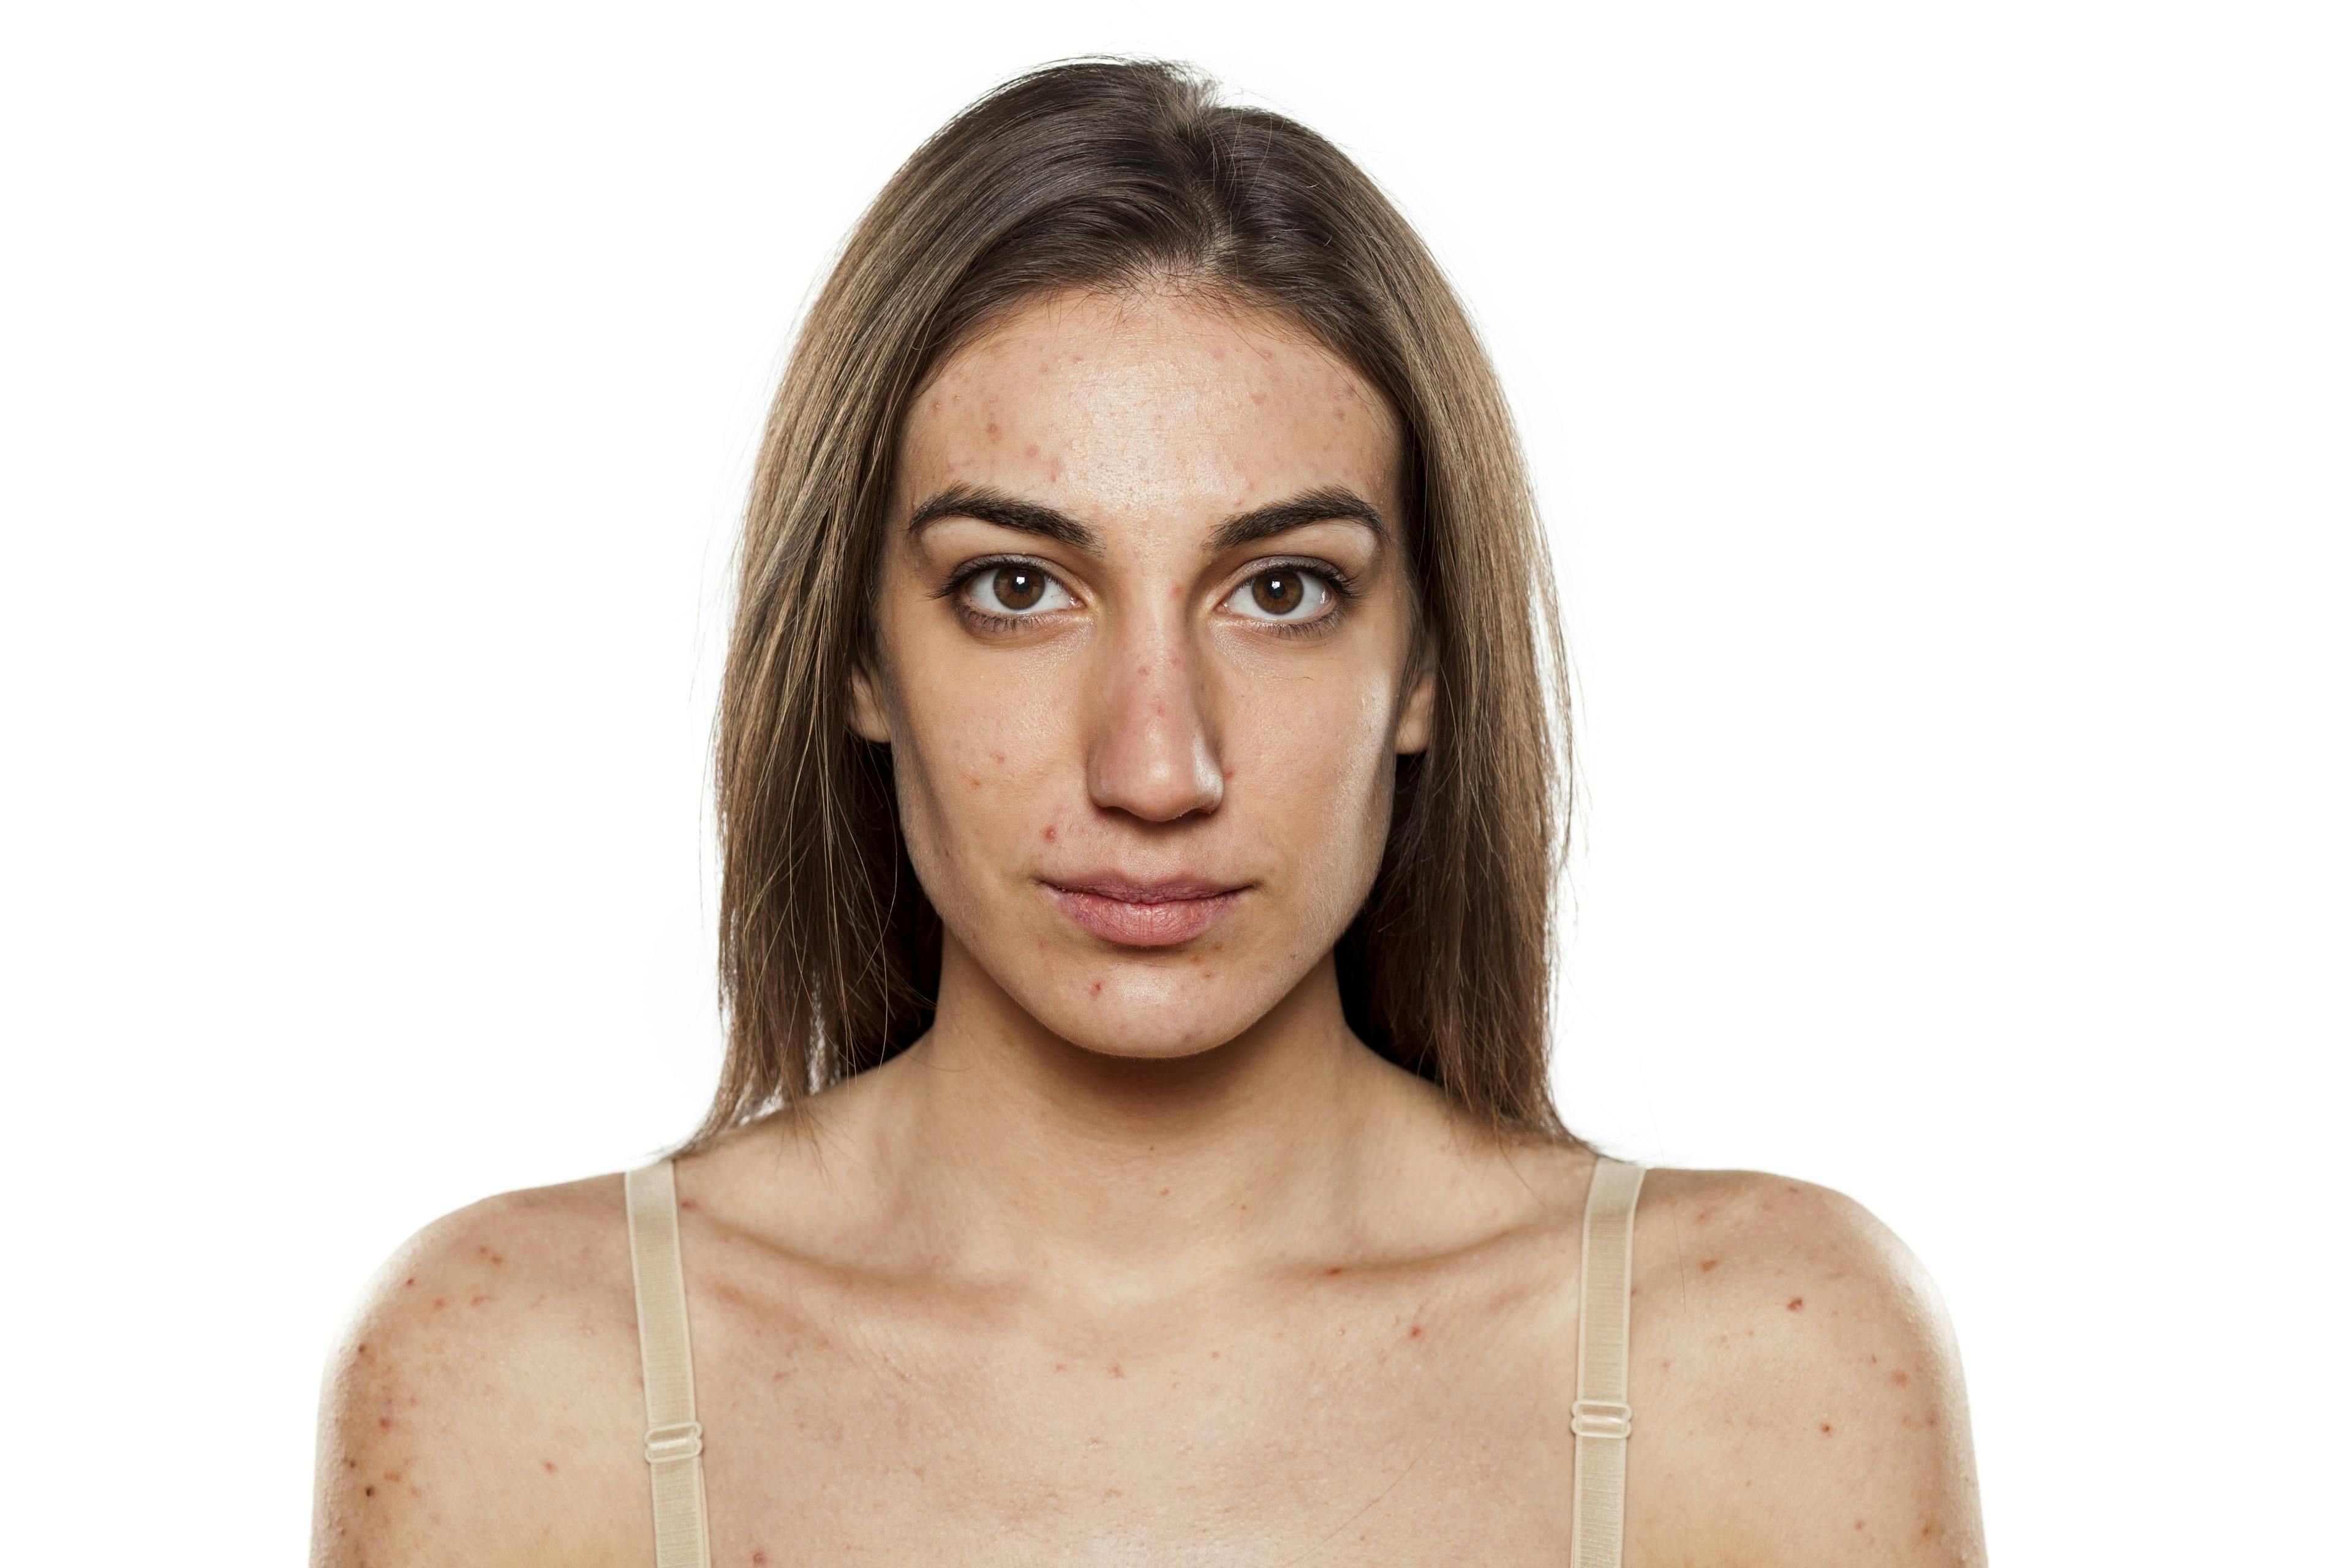 How Does Acne Affect the Adult Woman?